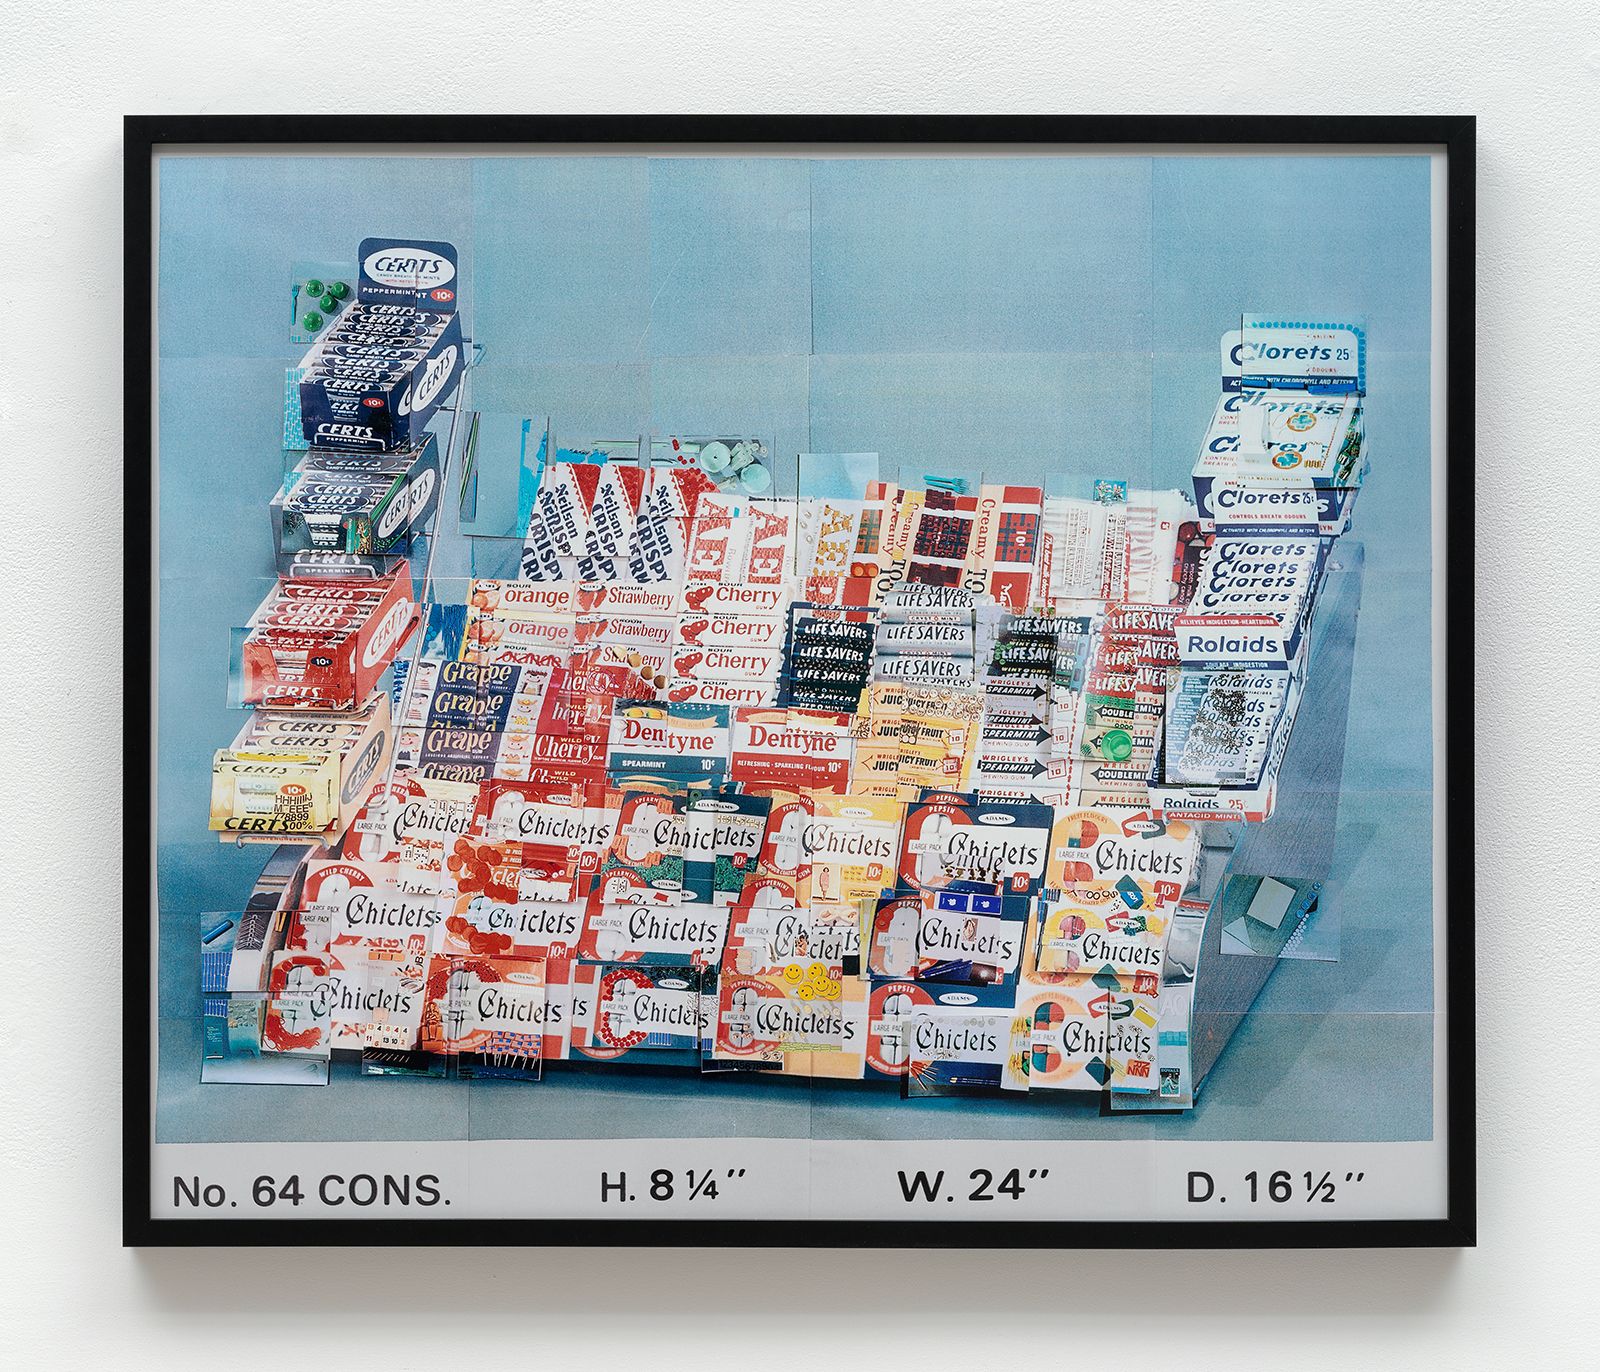 Sara Cwynar, Display Stand, No. 64 CONS H. 8 1/4 W. 24 D. 16 1/2, 2014, chromogenic print on matte paper mounted to plexiglas, 30 × 36 in.